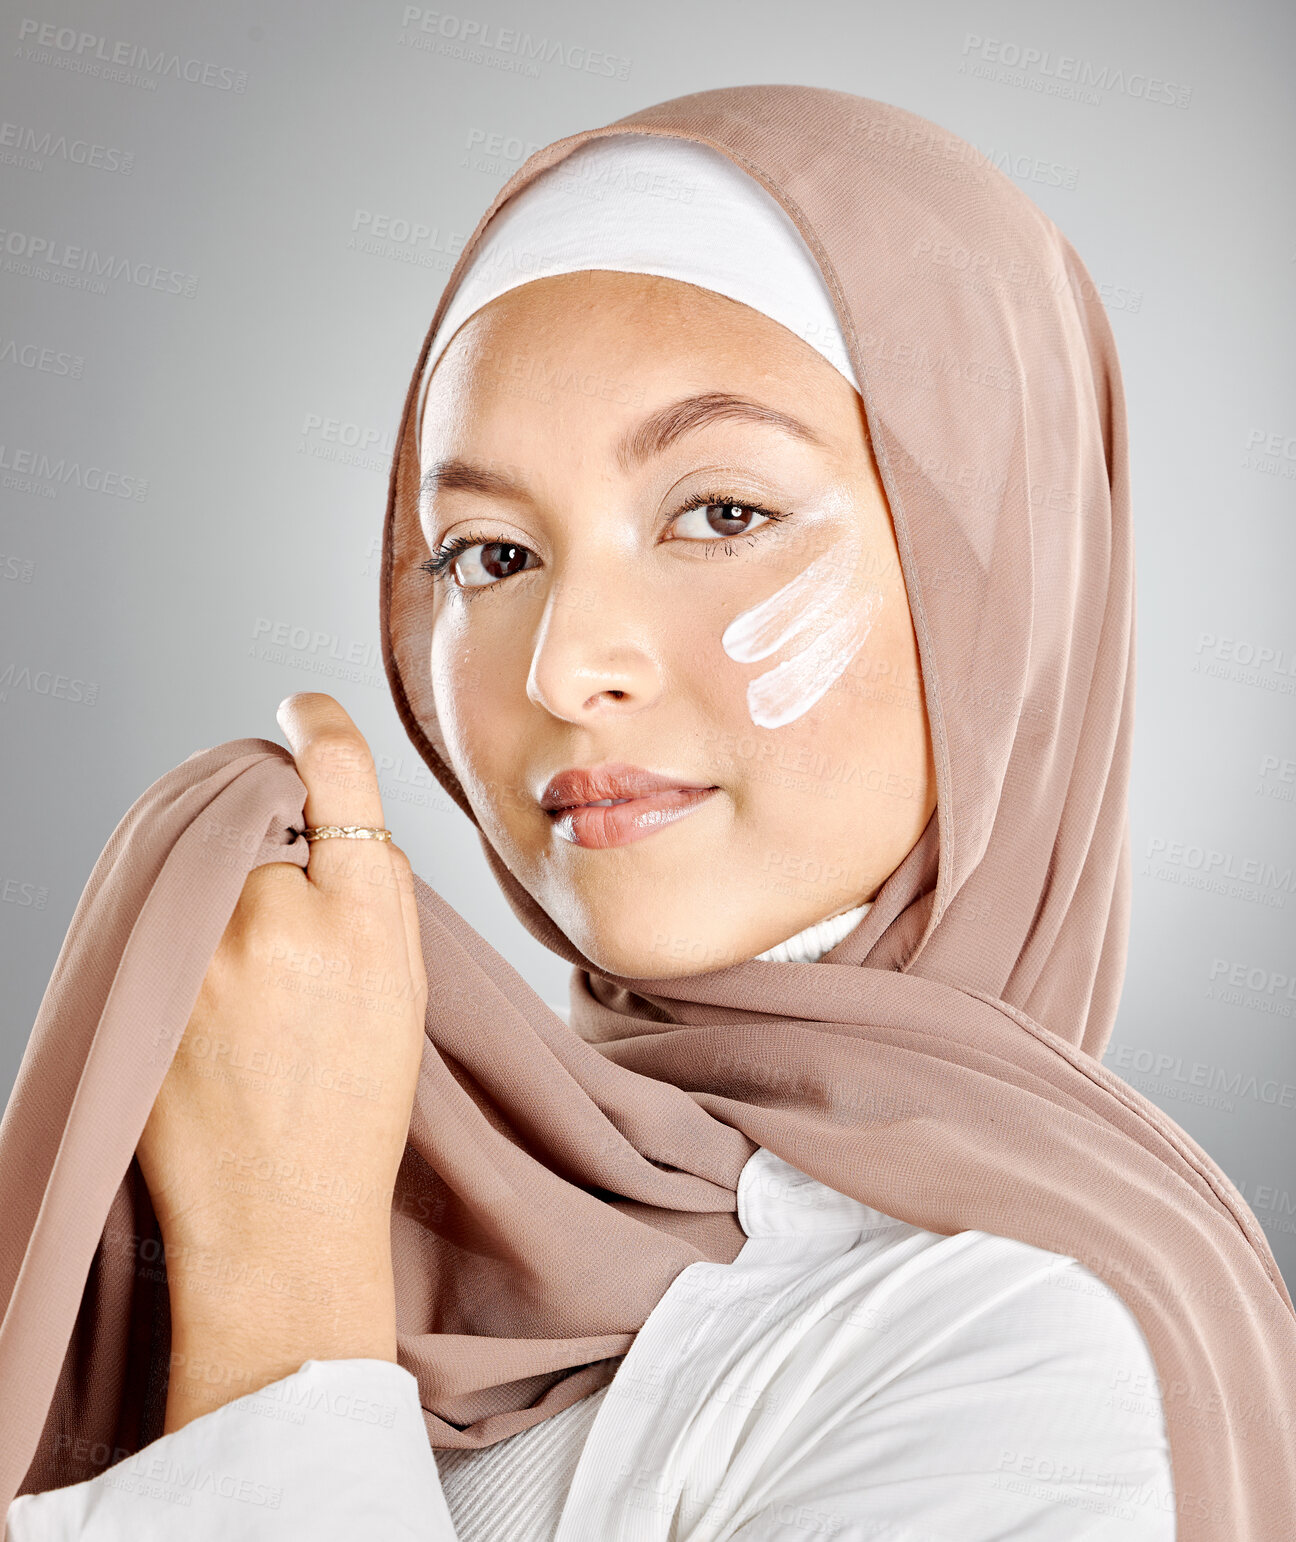 Buy stock photo Portrait of a Muslim woman using face moisturiser, sunscreen or lotion isolated on a grey studio background with copyspace. Young female wearing a hijab or headscarf while doing her skincare routine